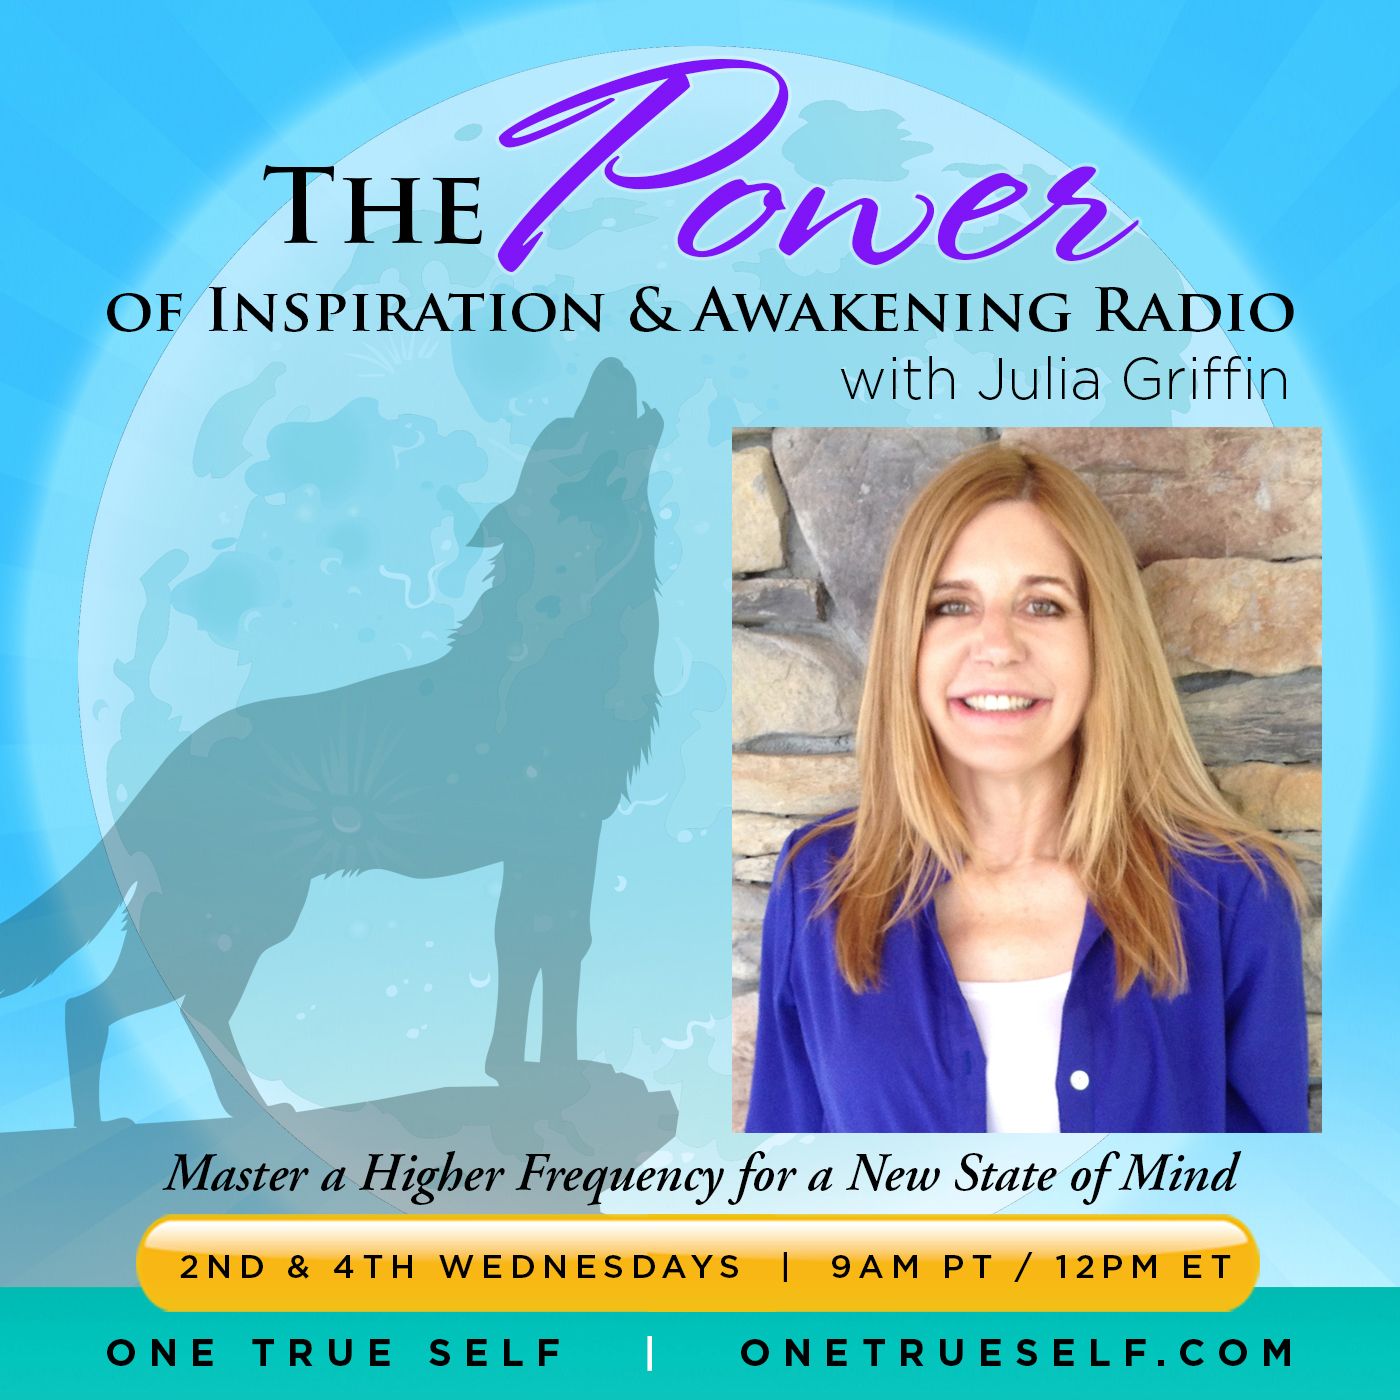 The Power of Inspiration & Awakening with Julia Griffin